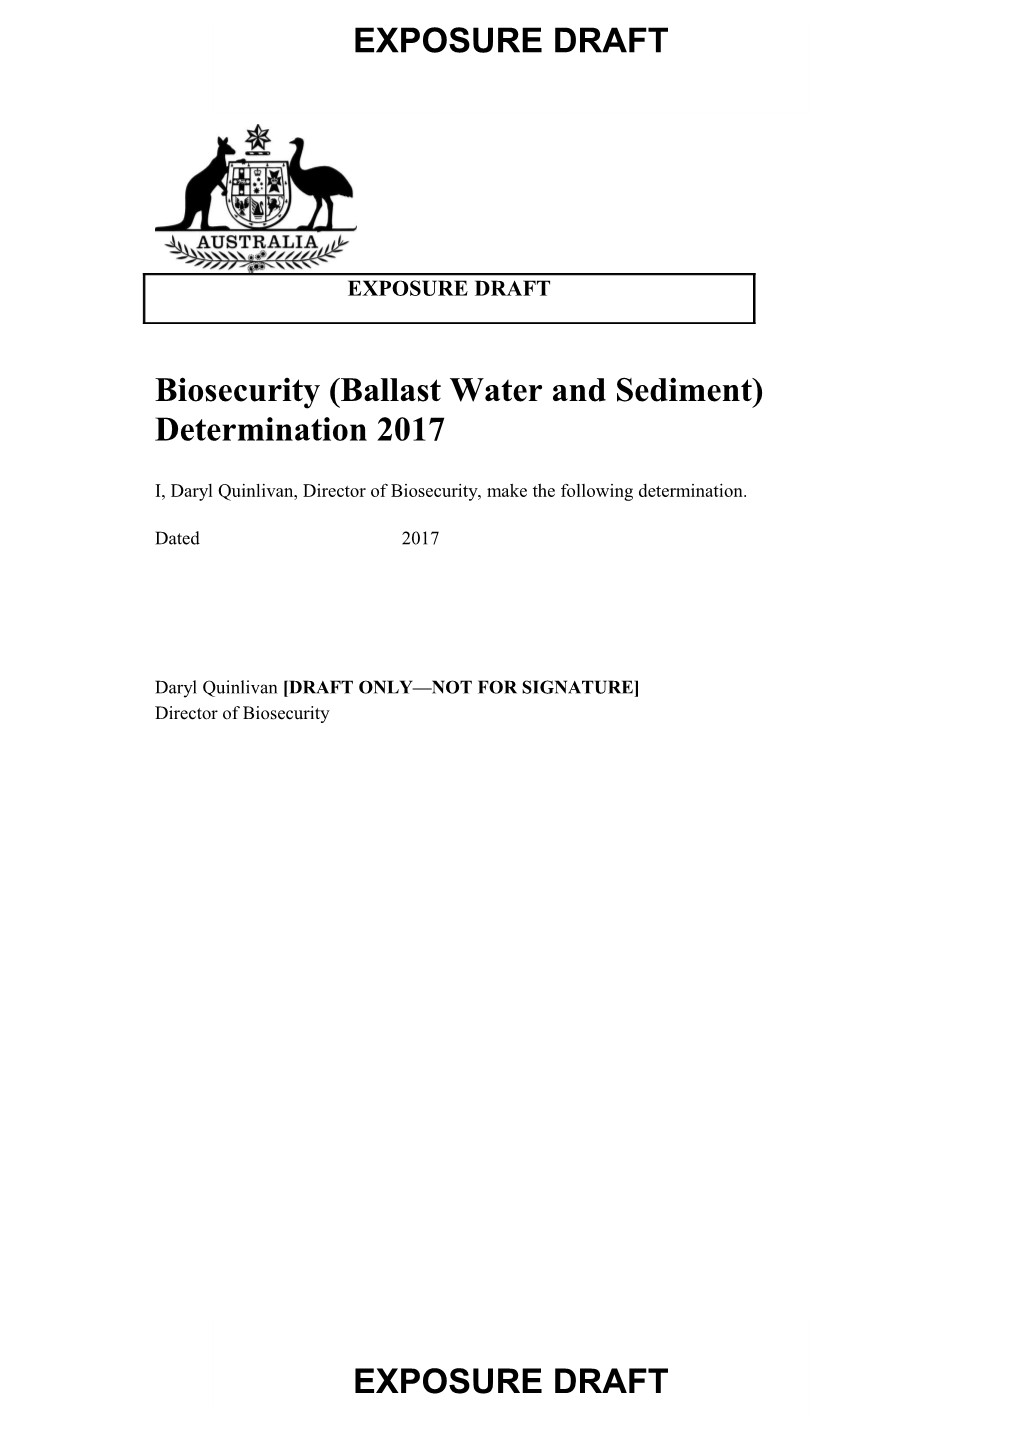 Biosecurity (Ballast Water and Sediment) Determination 2017